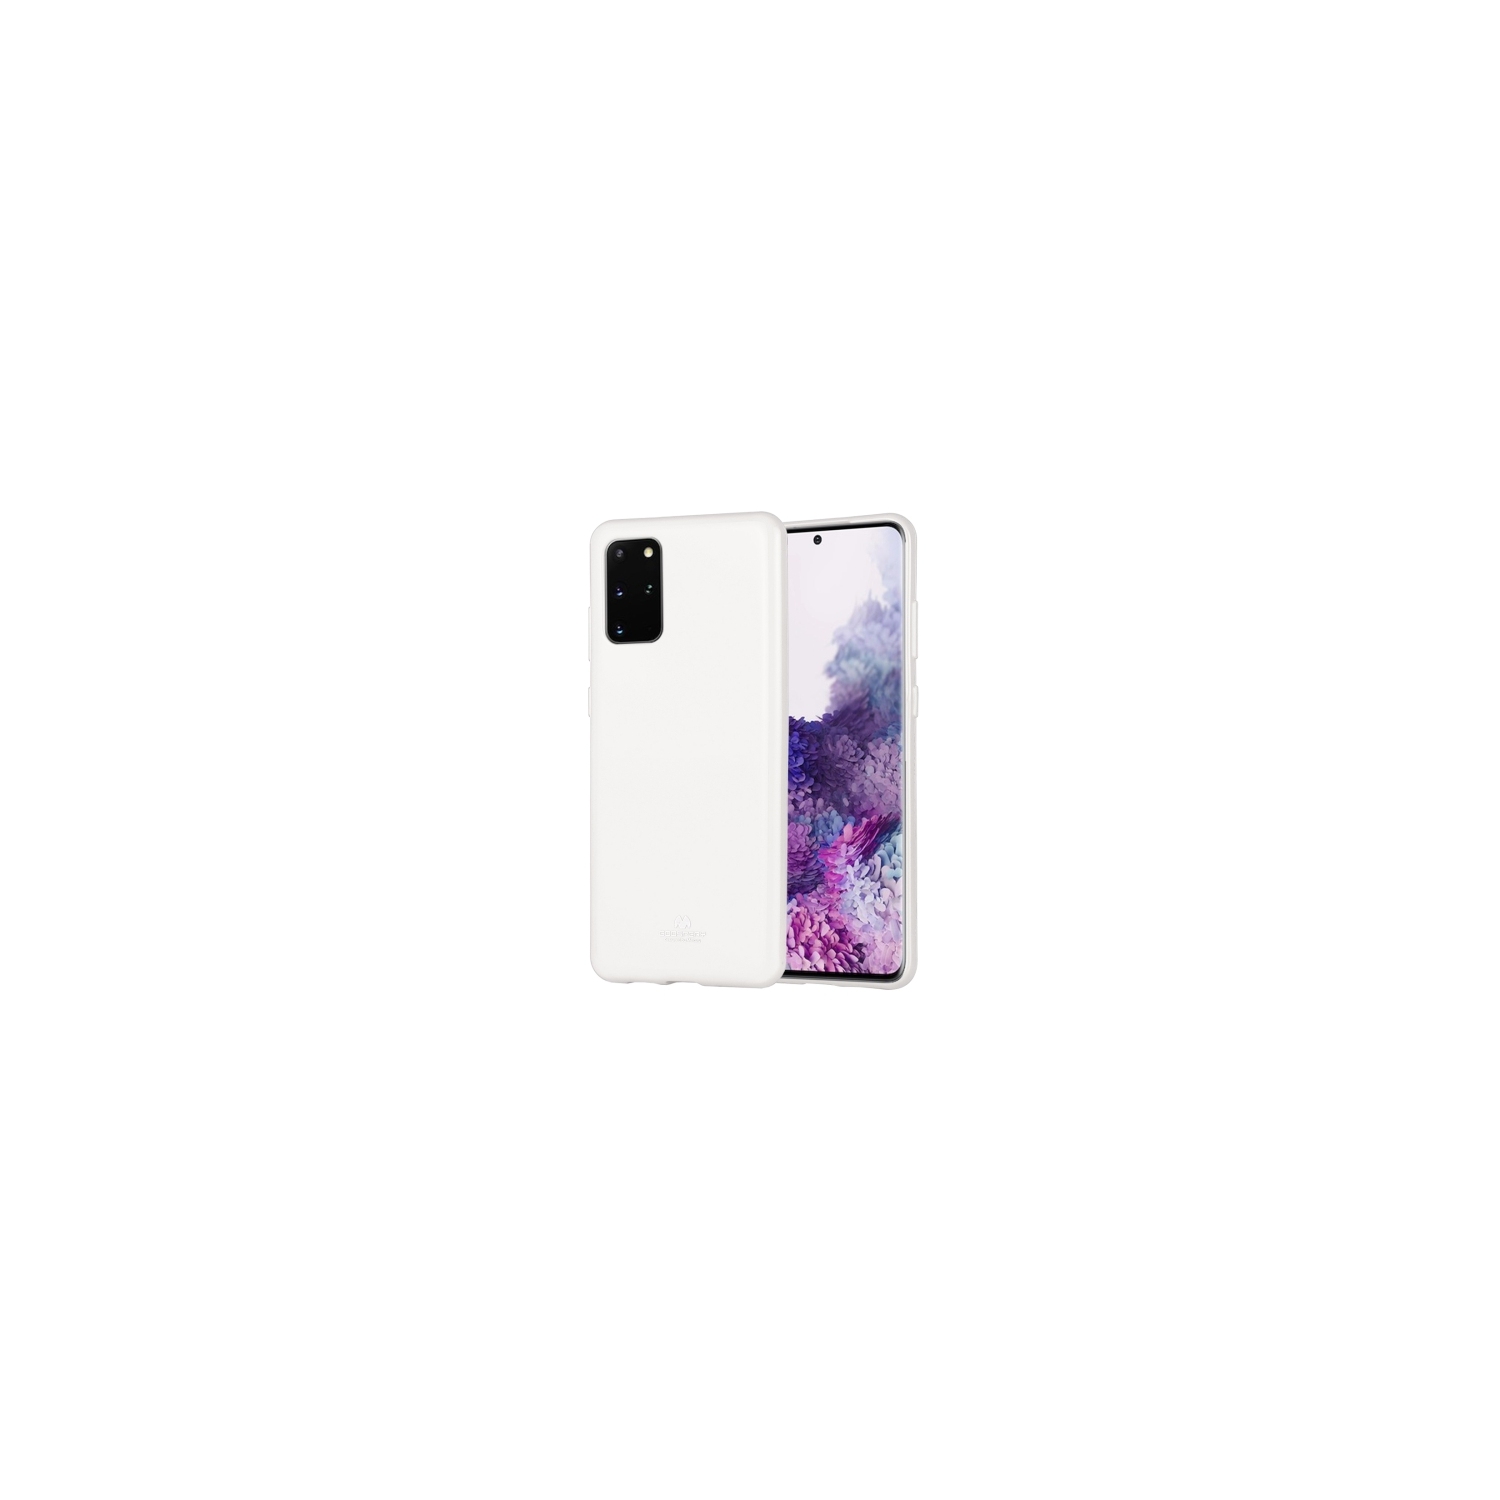 TopSave Goospery Jelly Case For Huawei P40 Pro, White